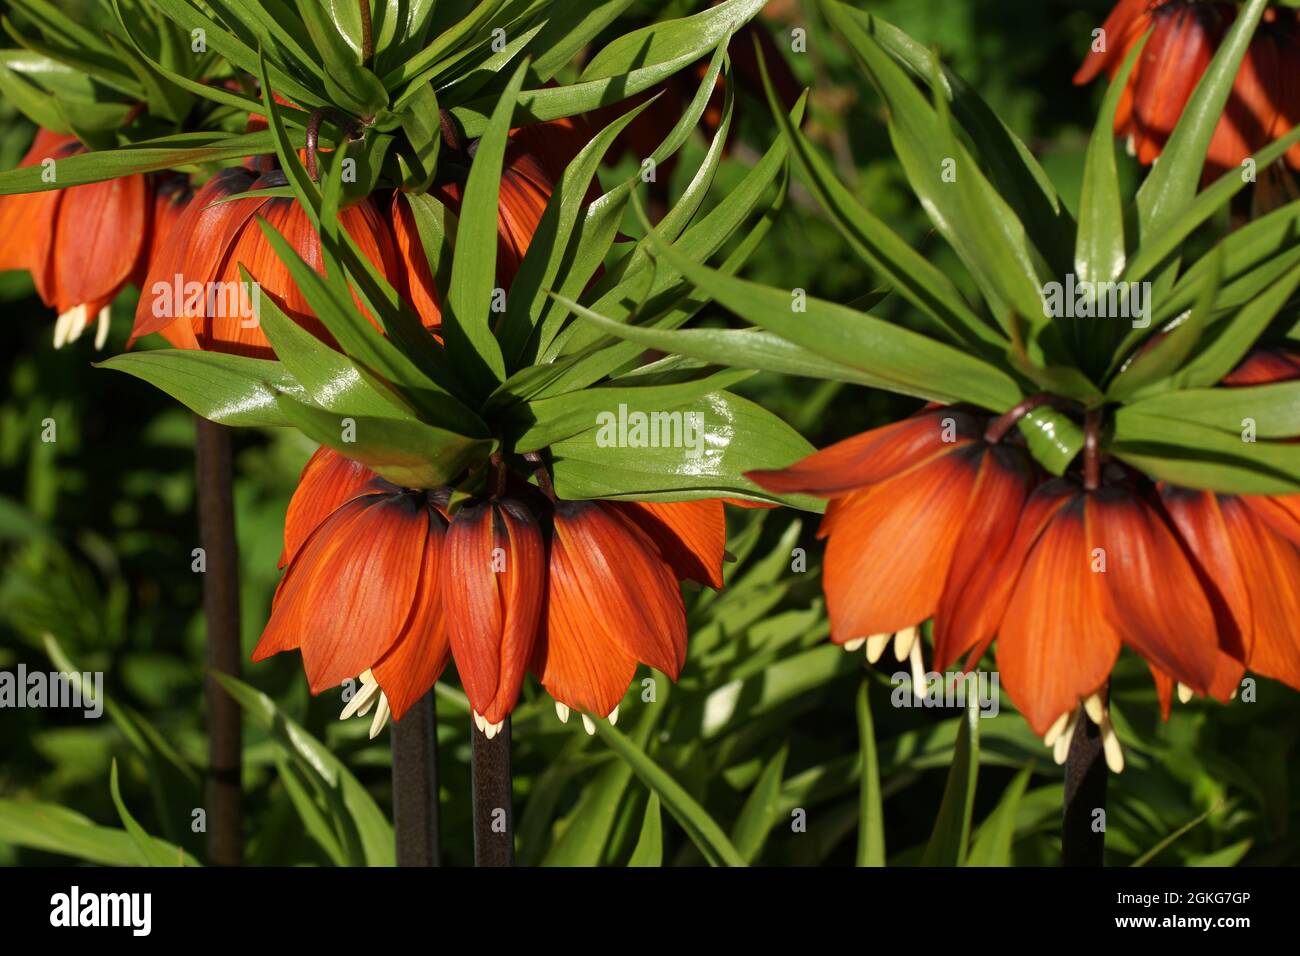 Fritillaria imperialis (crown imperial, imperial fritillary or Kaiser's crown) is a species of flowering plant in the lily family. Stock Photo